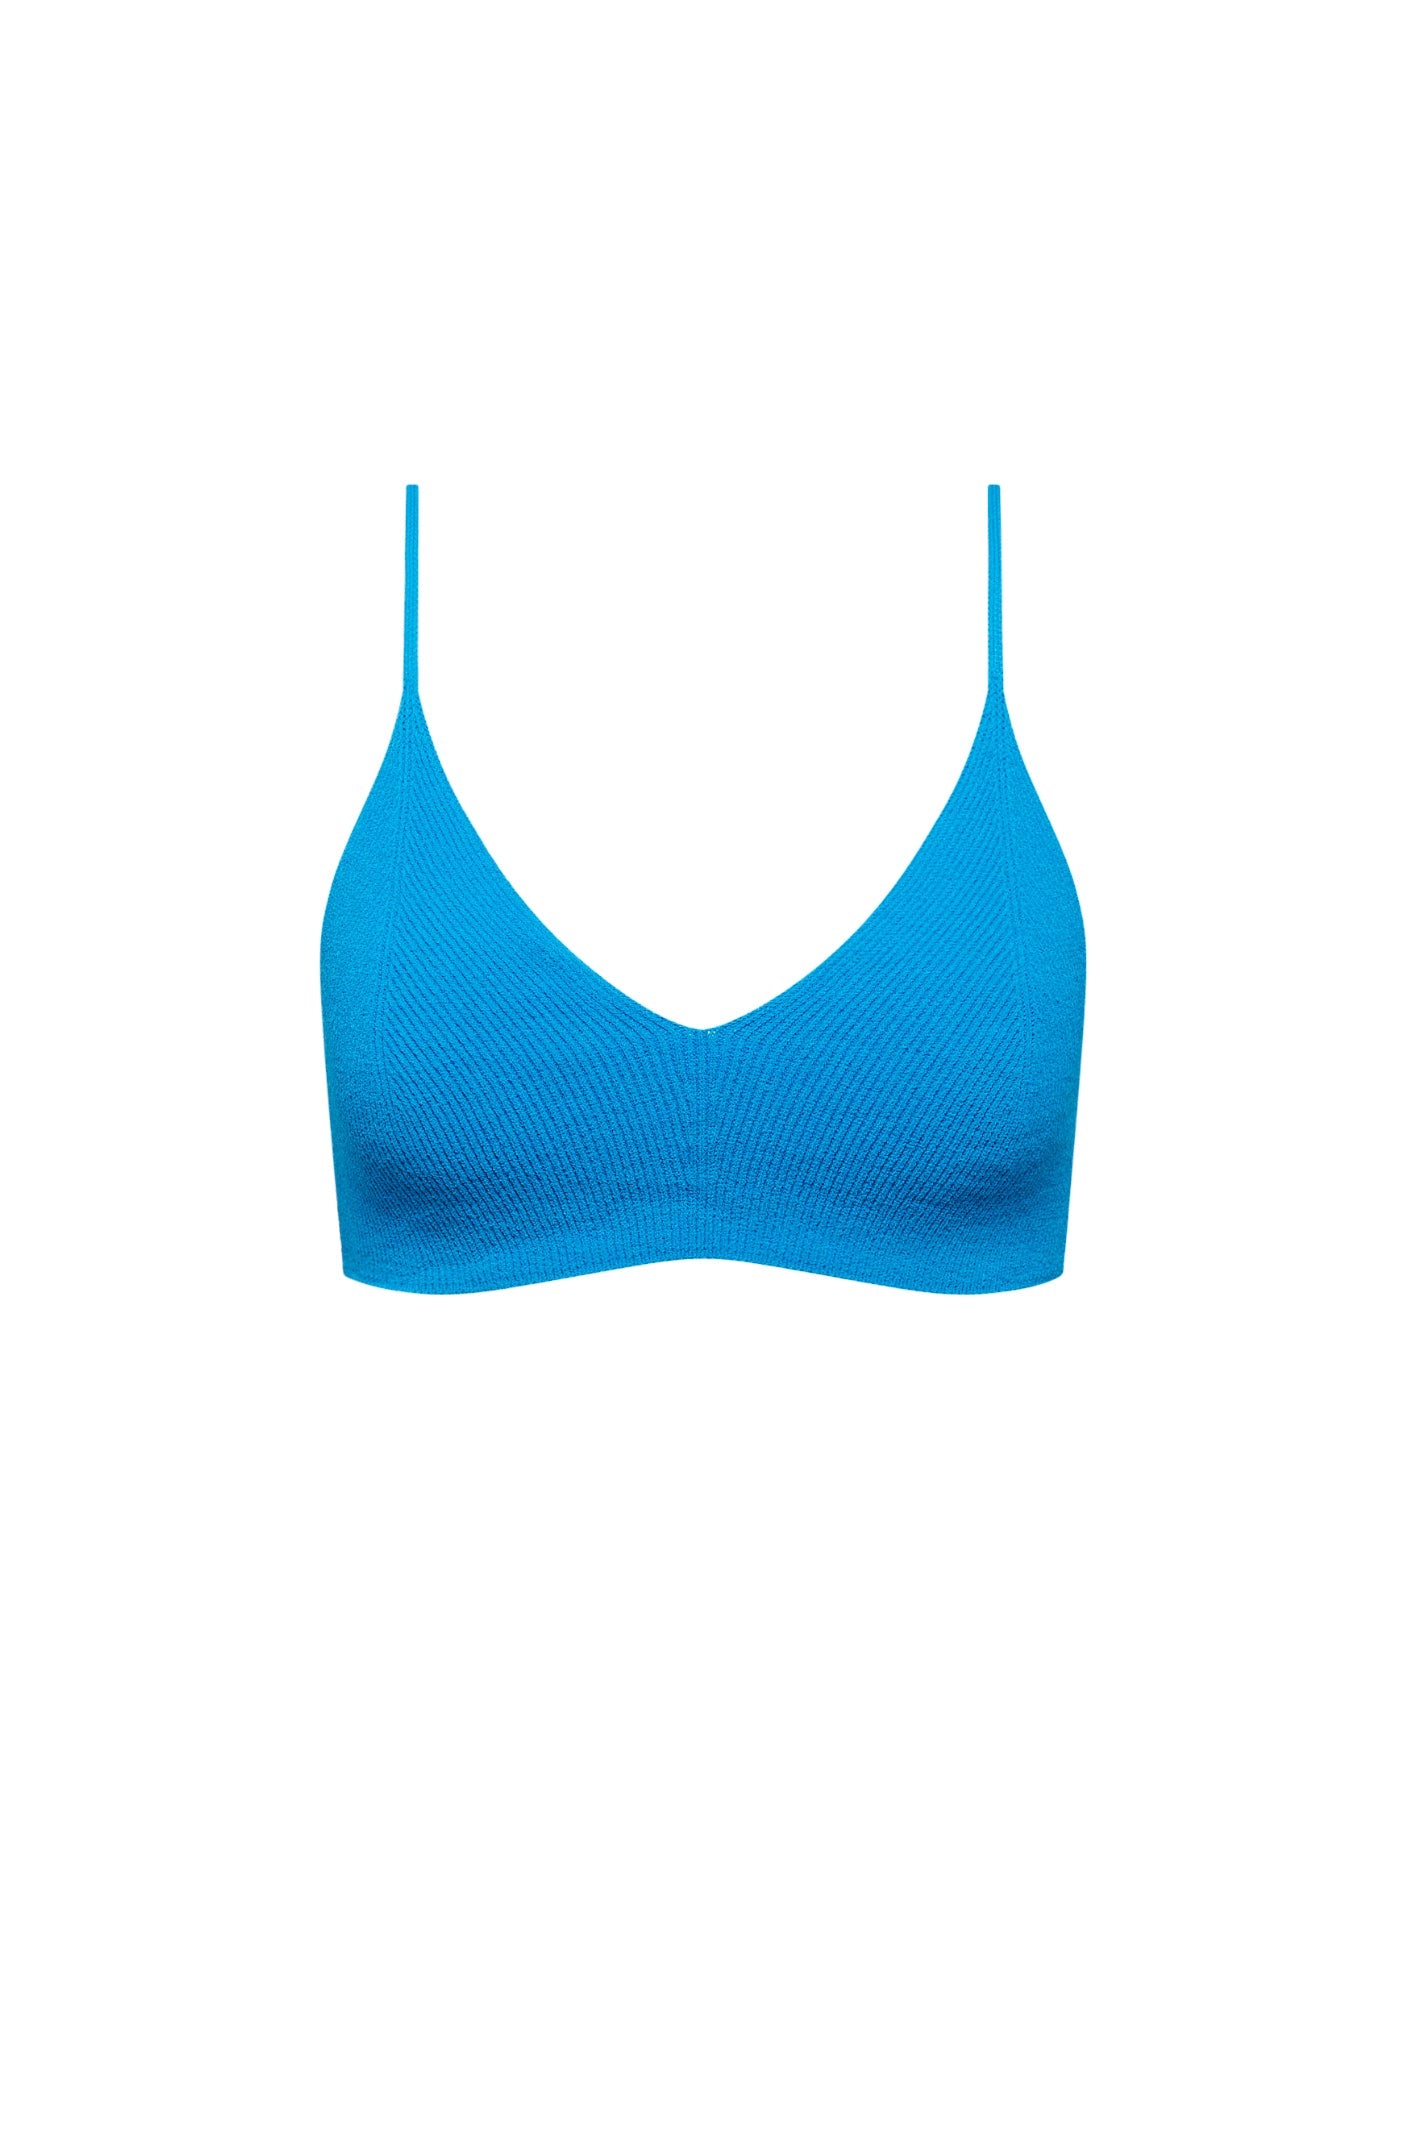 CREPE KNIT BRALETTE - TURQUOISE